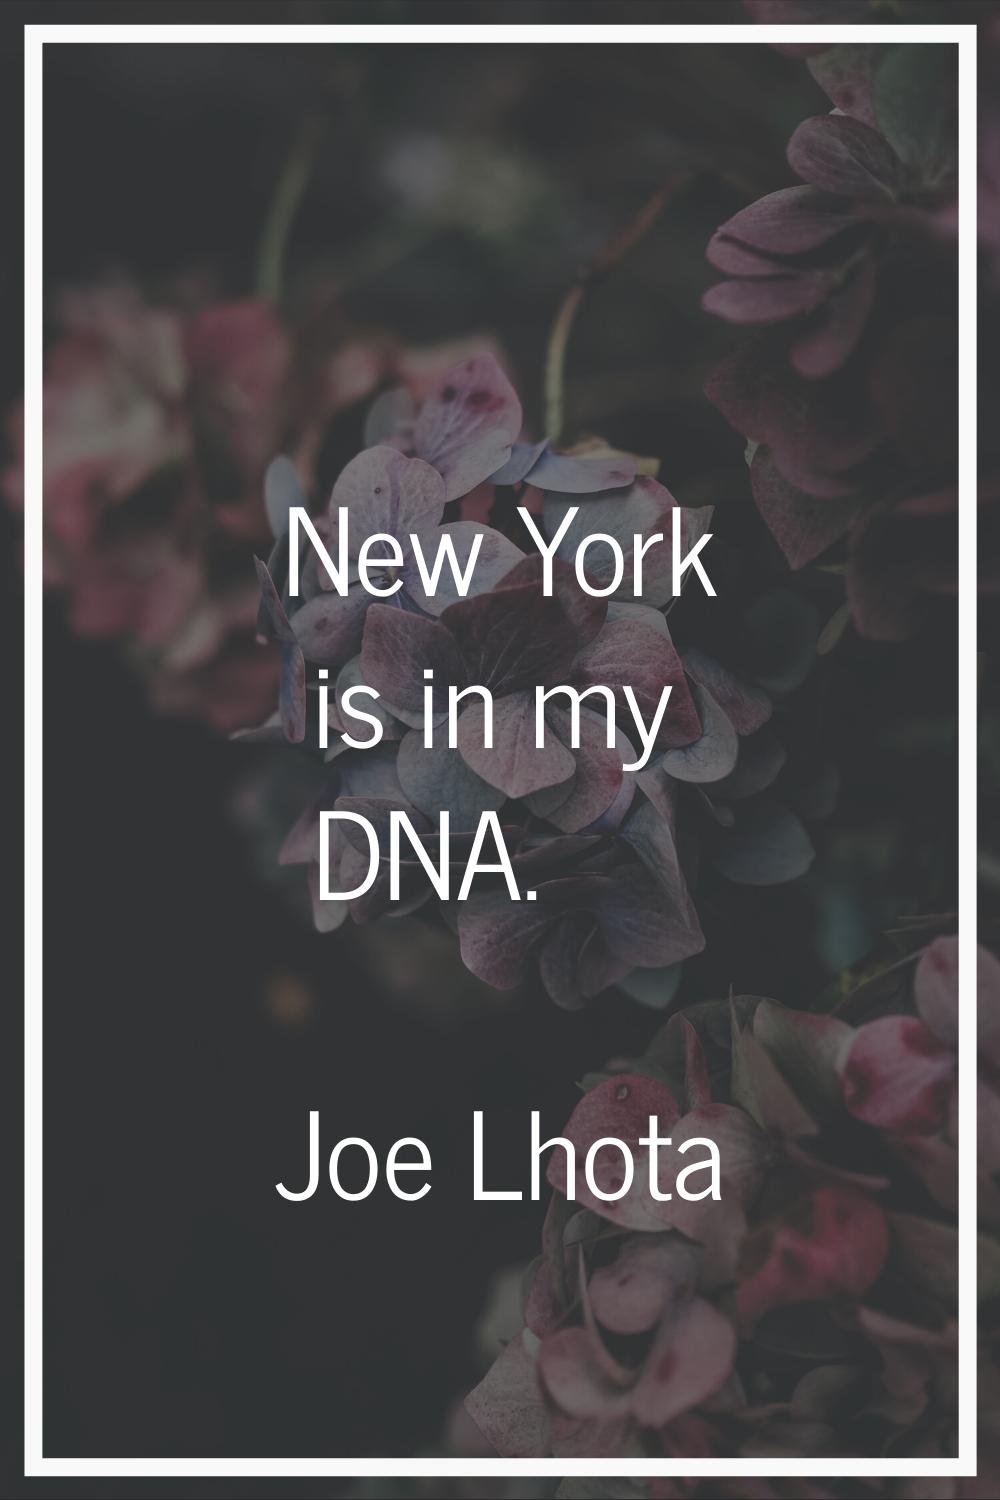 New York is in my DNA.